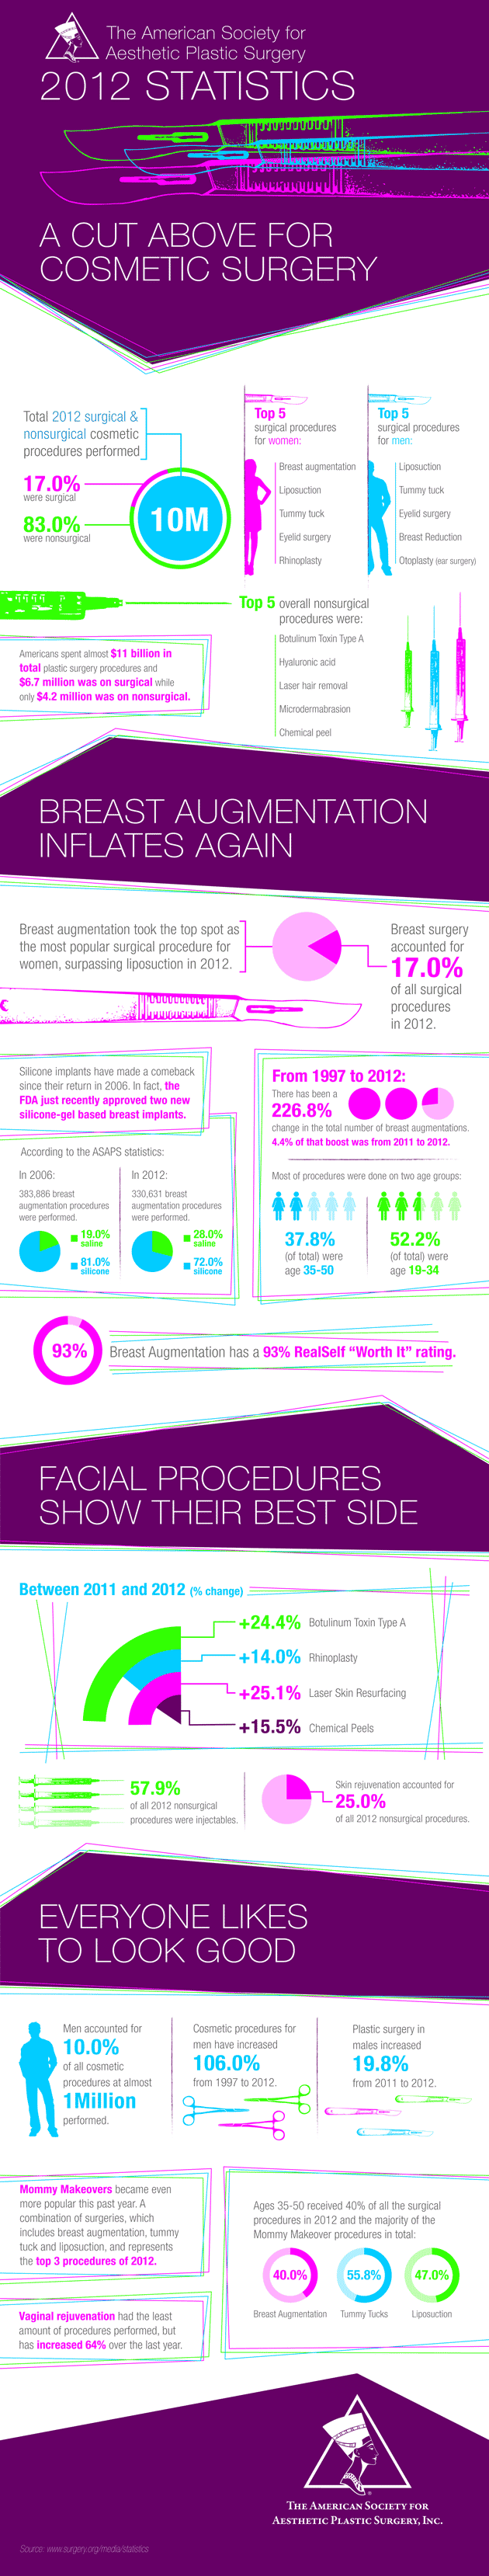 Male Plastic Surgery and Cosmetic Injections Grow in Popularity During 2012